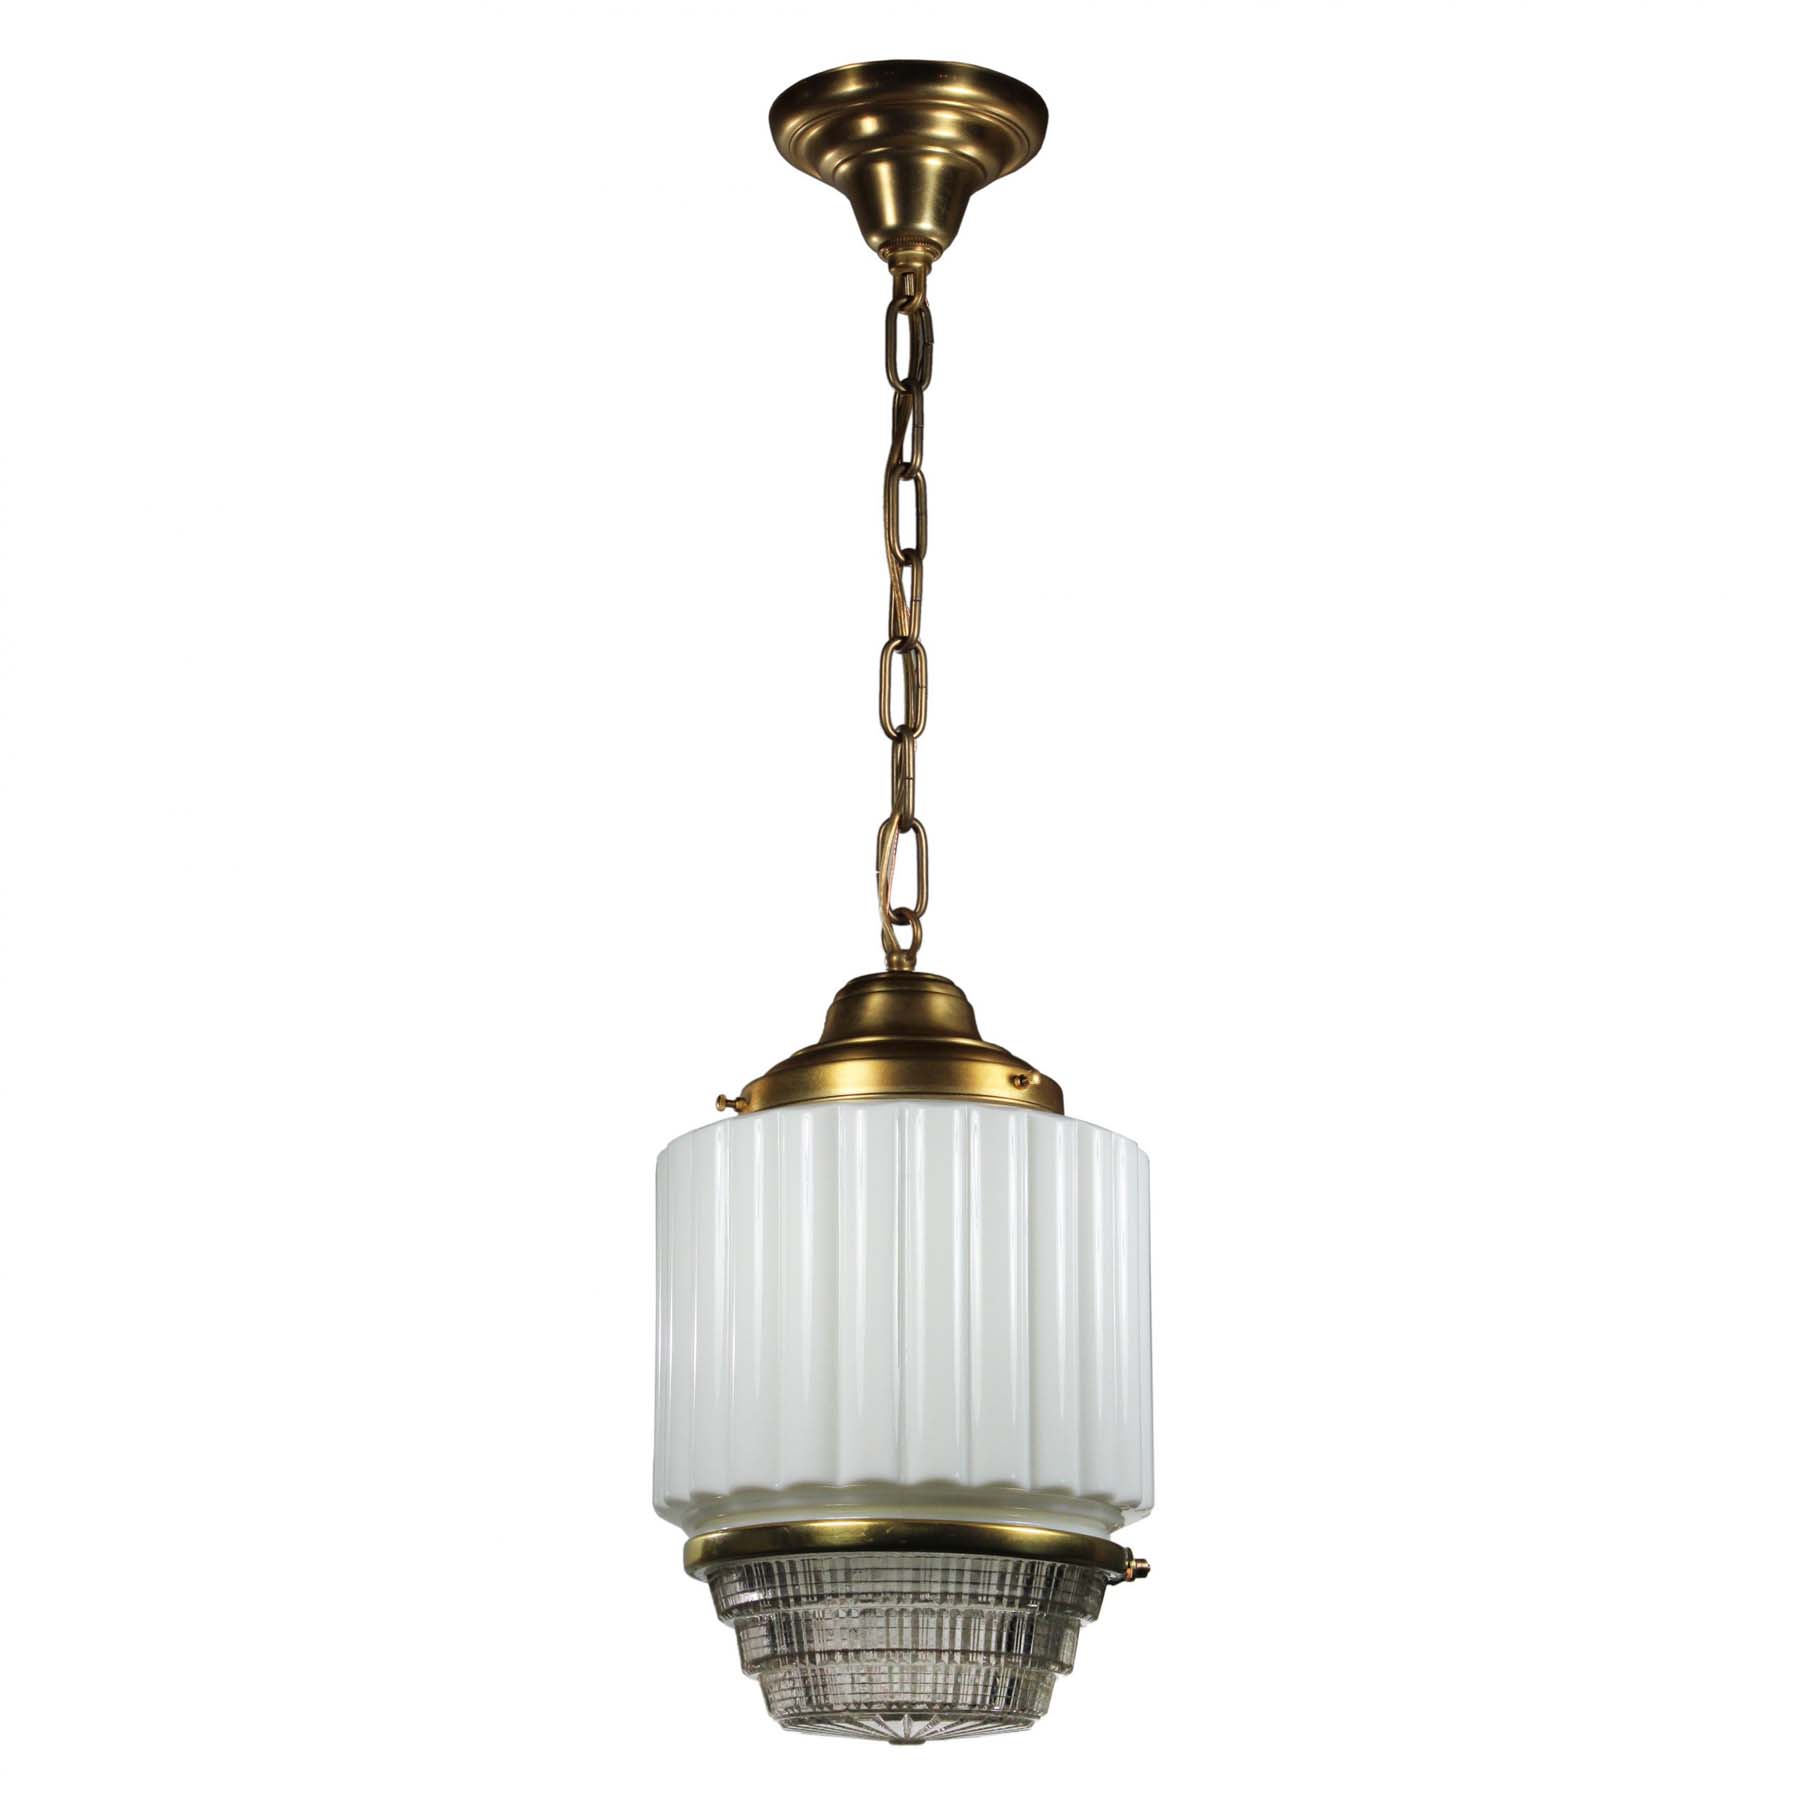 SOLD Antique Brass Art Deco Skyscraper Pendant Light with Two-Part Prismatic Shade-70480